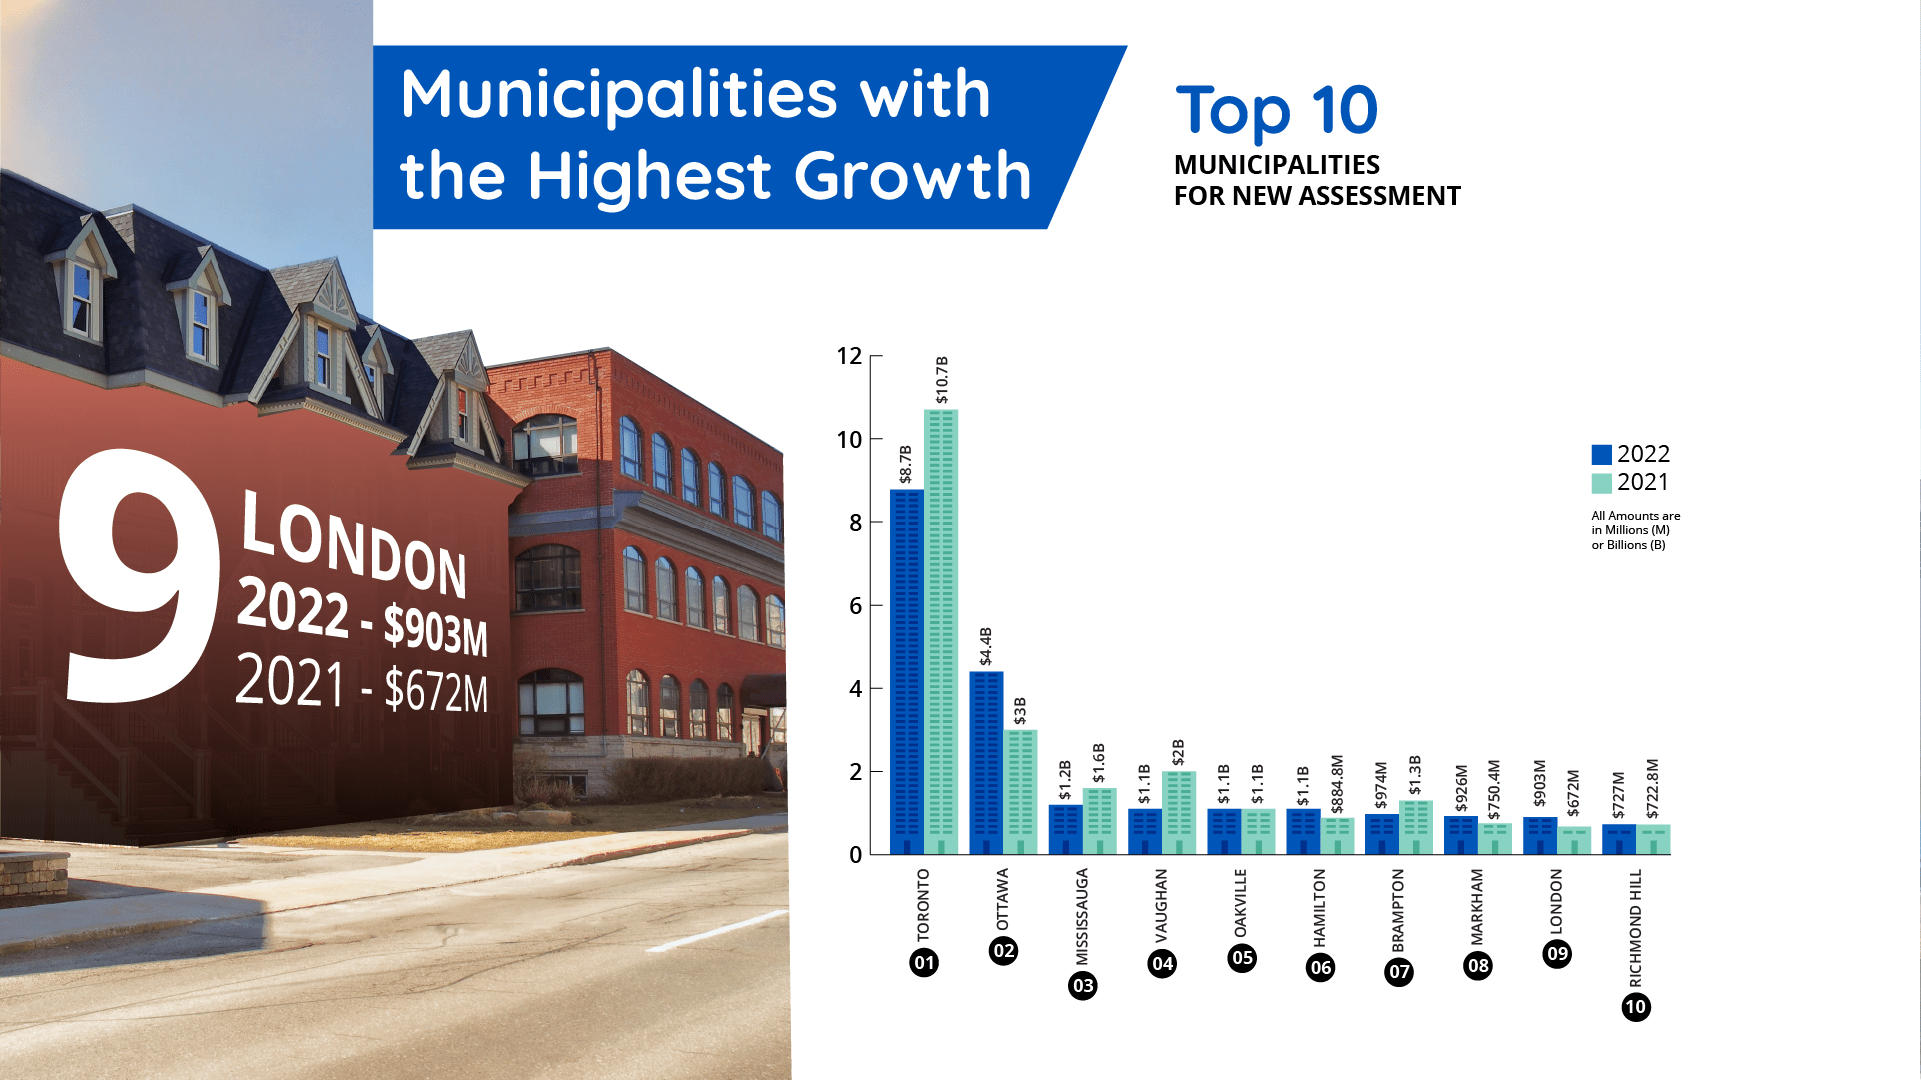 Visual of the top 10 municipalities for new assessment